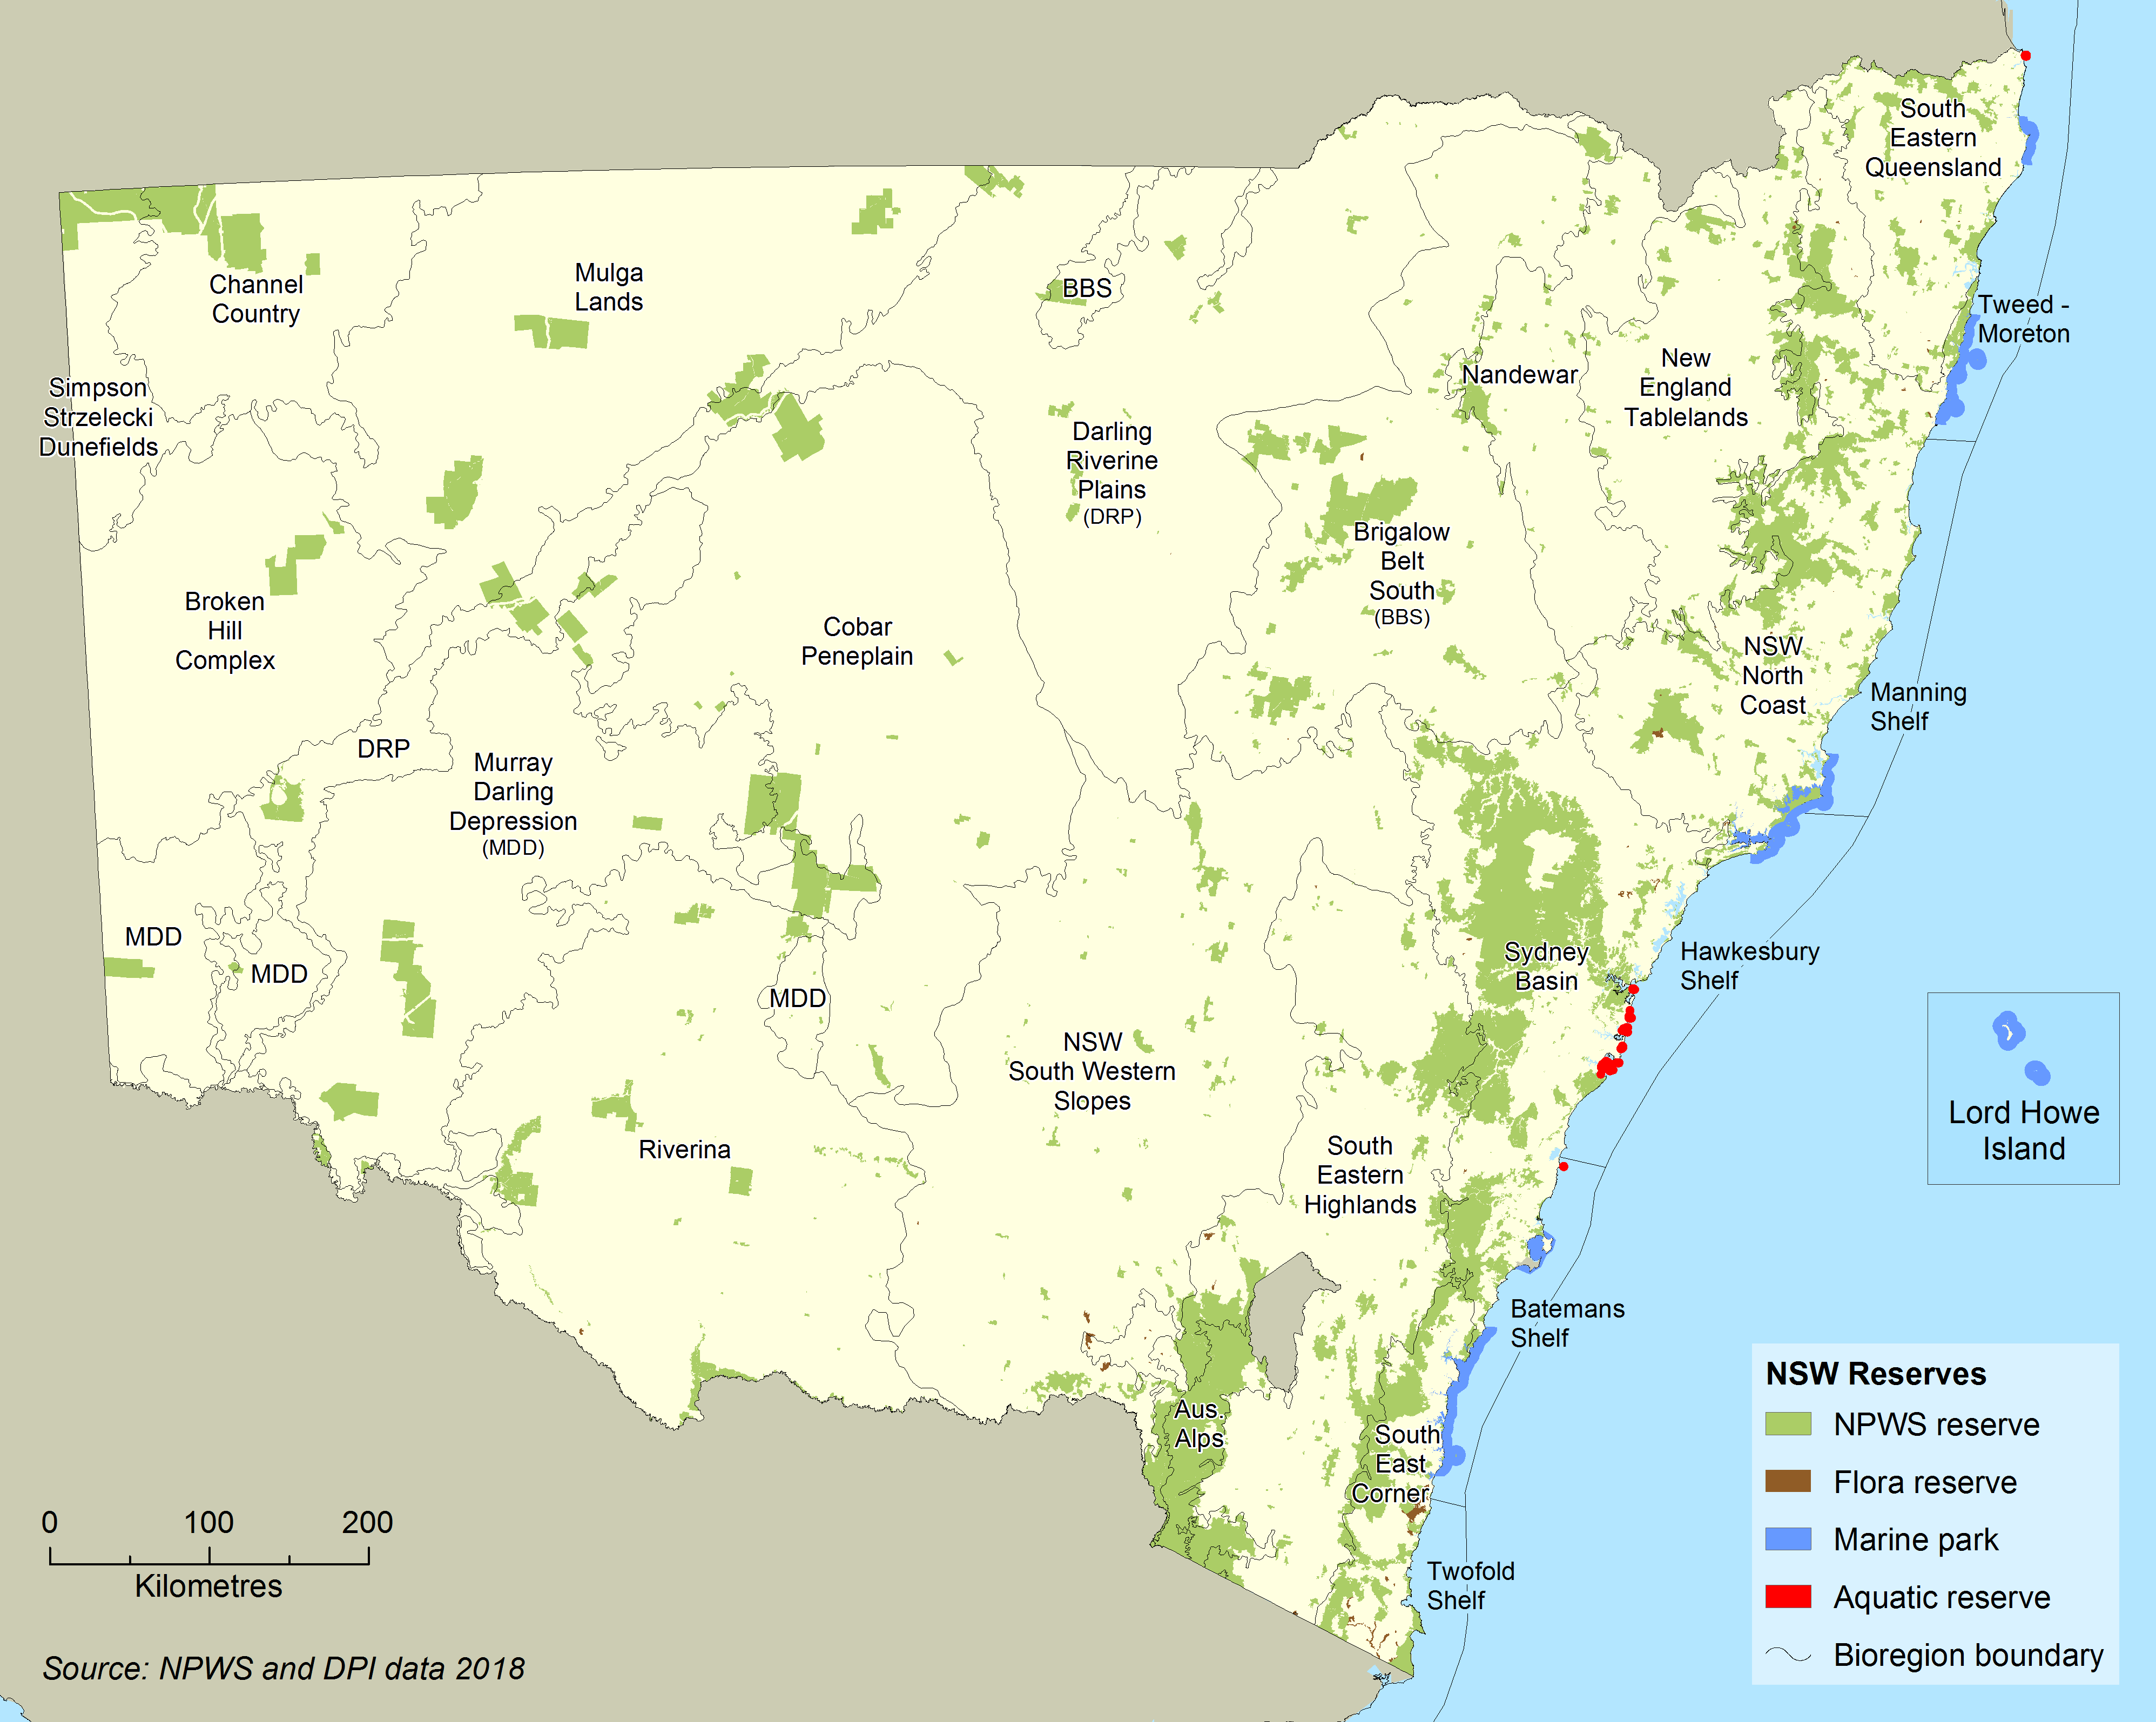 Map of New South Wales showing NPWS reserves, flora reserves, marine parks and aquatic reserves